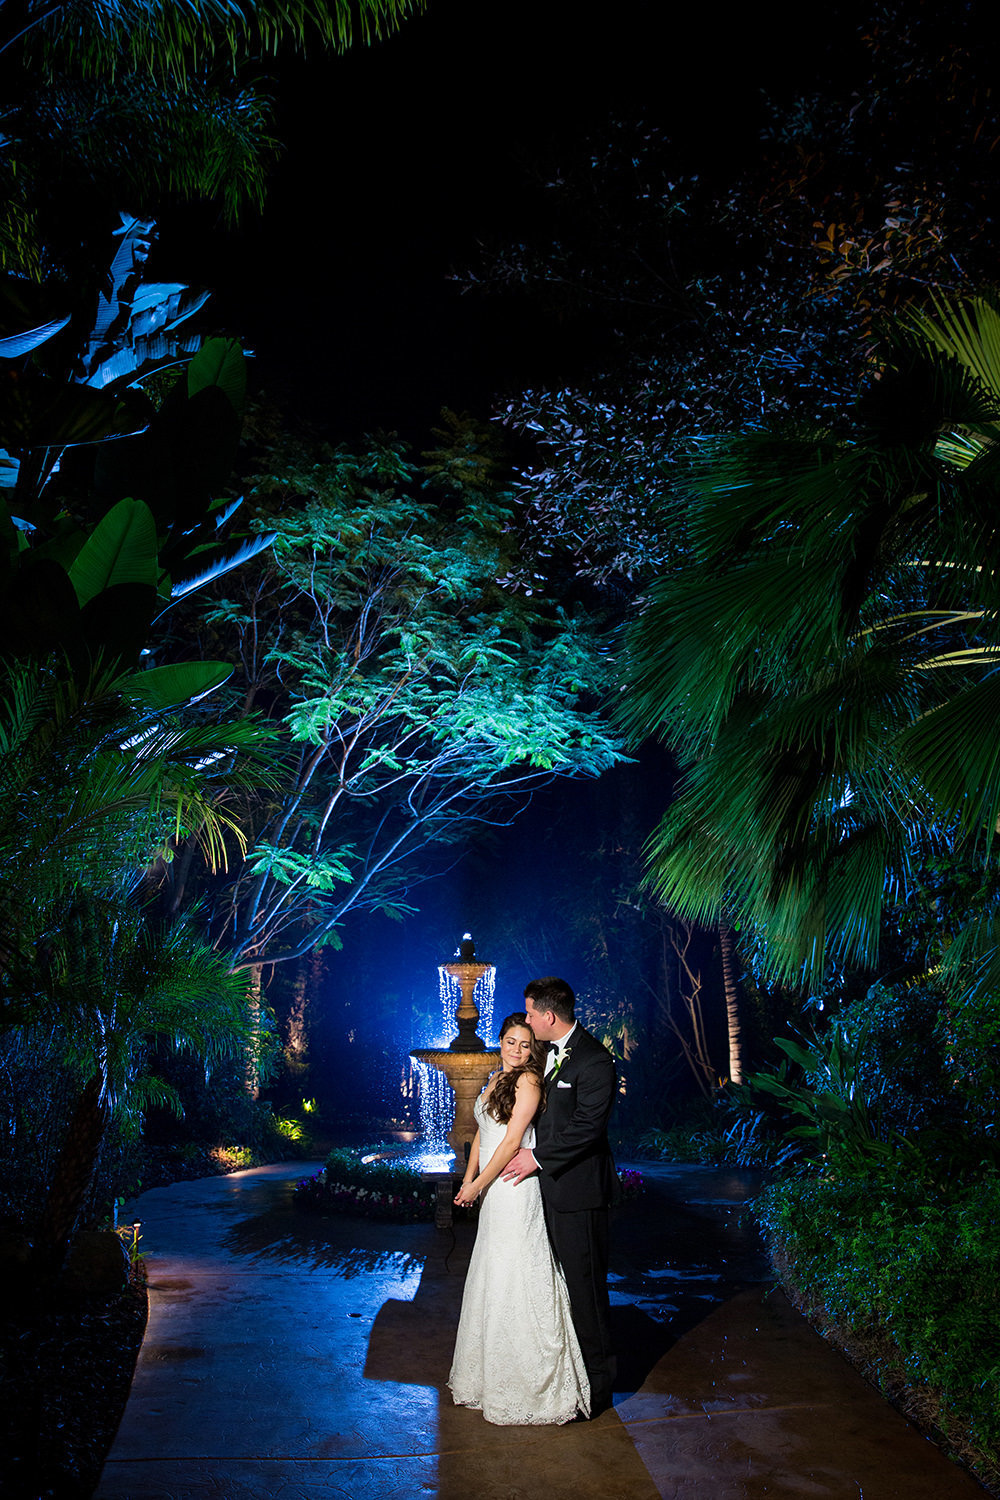 Dramatic night time portrait at Grand Tradition Arbor Terrace